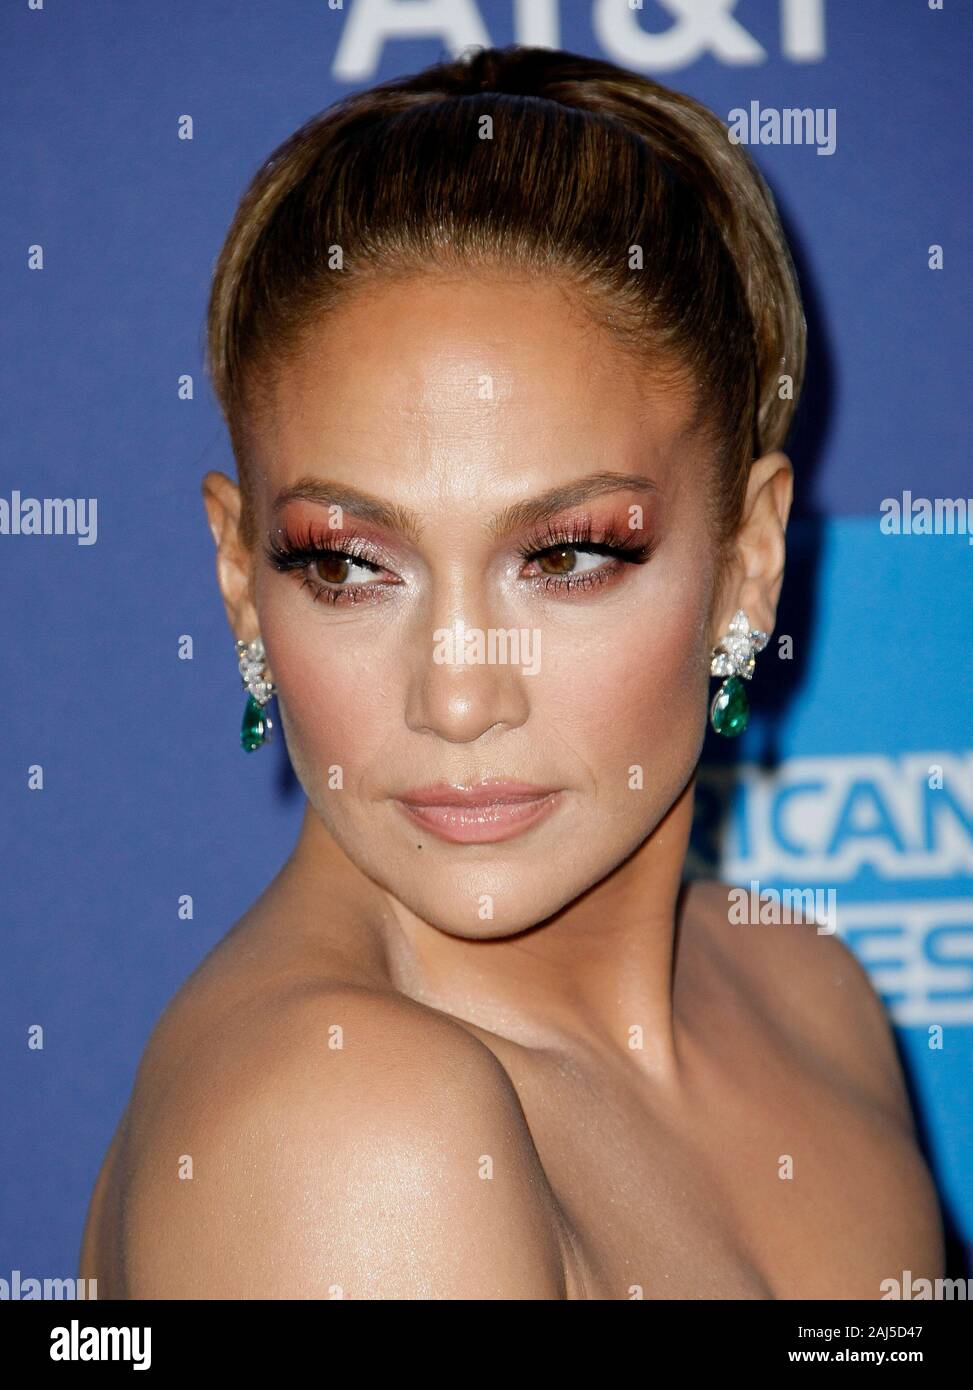 Palm Springs, California, USA. 2nd January, 2020. Jennifer Lopez attends the 31st Annual Palm Springs International Film Festival Film Awards Gala at Palm Springs Convention Center on January 02, 2020 in Palm Springs, California. Photo: CraSH/imageSPACE/MediaPunch Credit: MediaPunch Inc/Alamy Live News Stock Photo